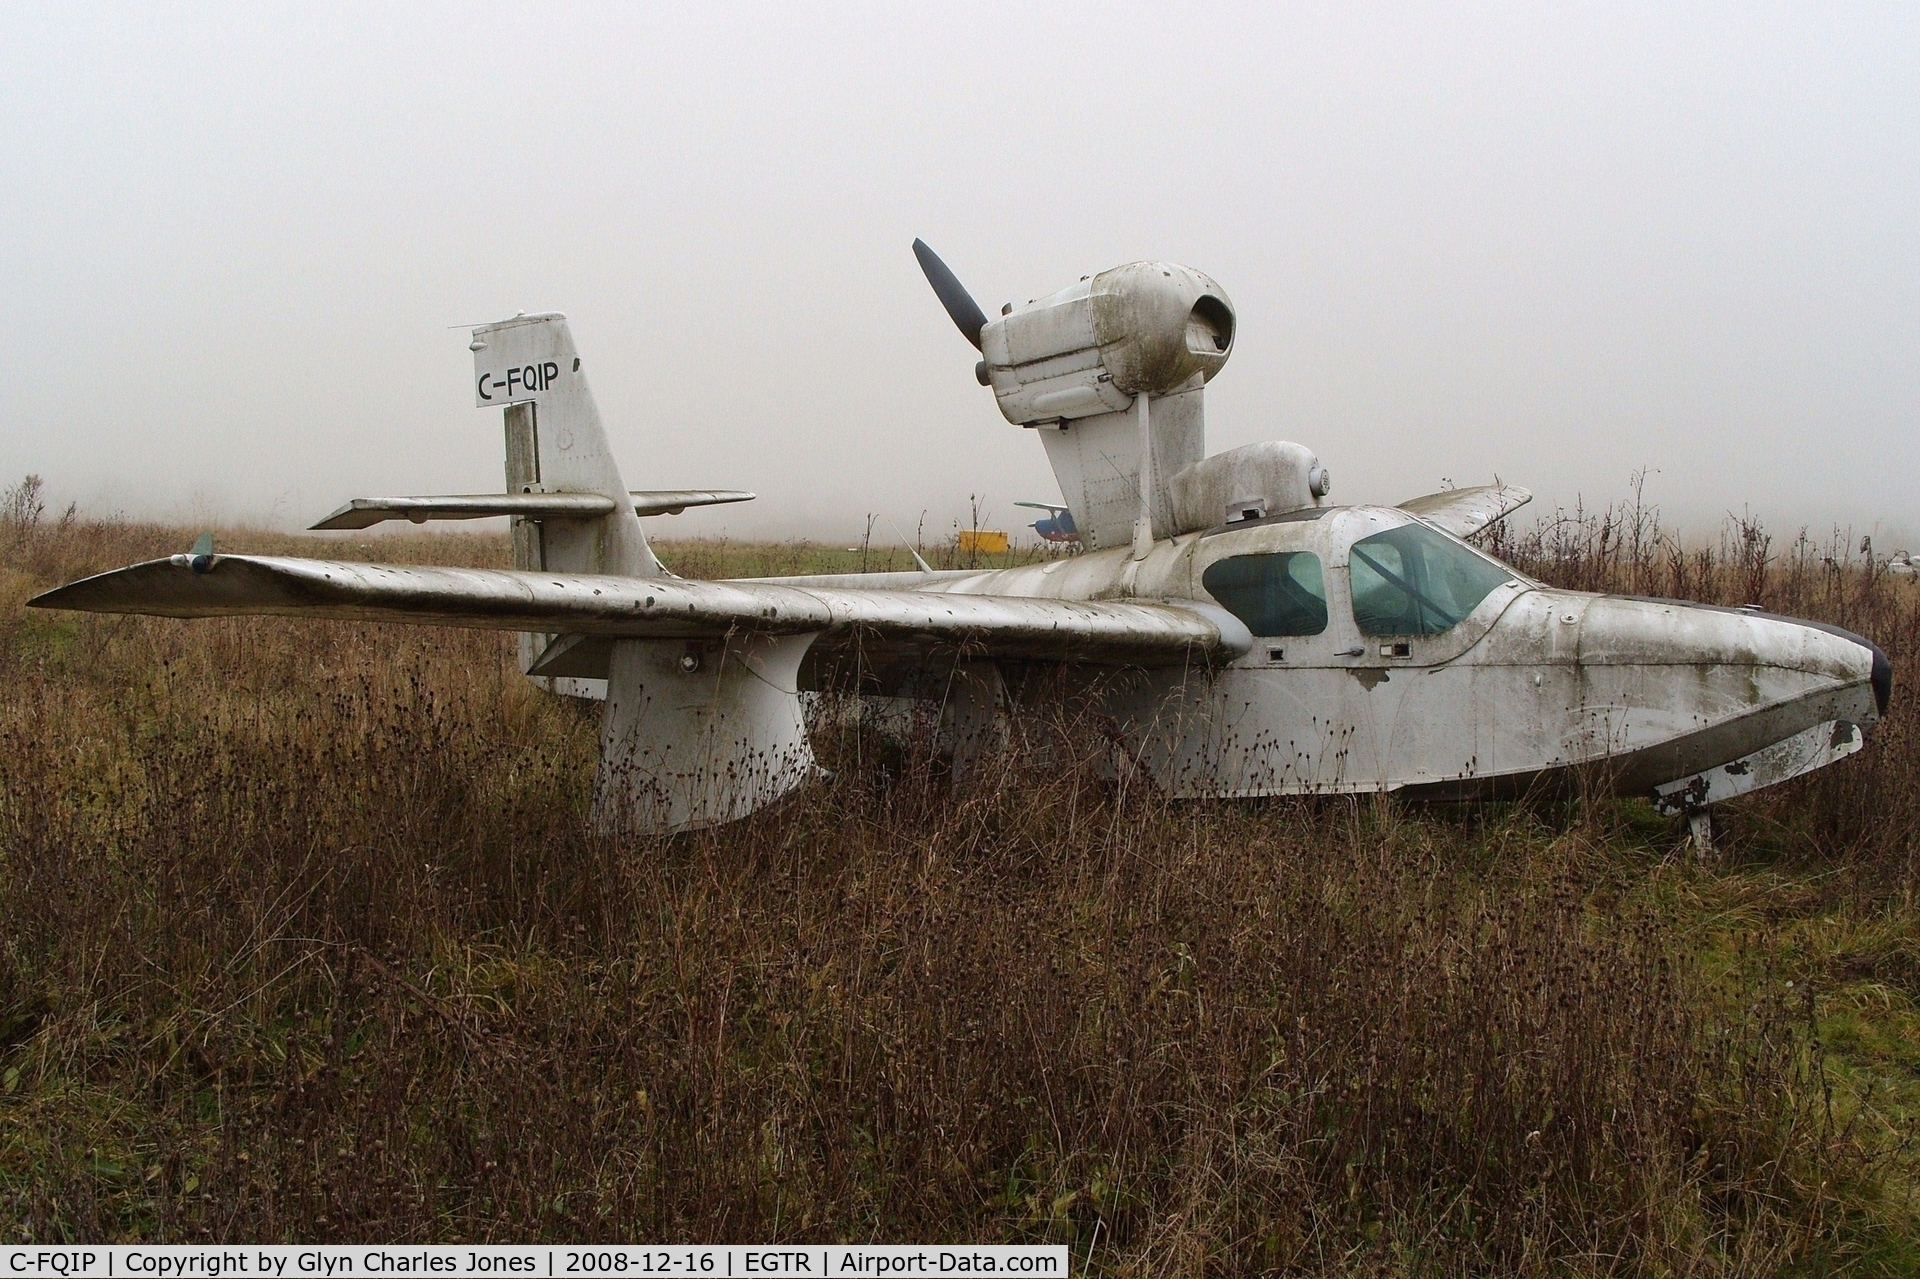 C-FQIP, 1975 Lake LA-4-200 Buccaneer C/N 679, View from the other side. Taken on a quiet cold and foggy day. Sadly looking rather shabby after being exposed to the elements for a very long period of time and is gradually being engulfed by the plant life around it.